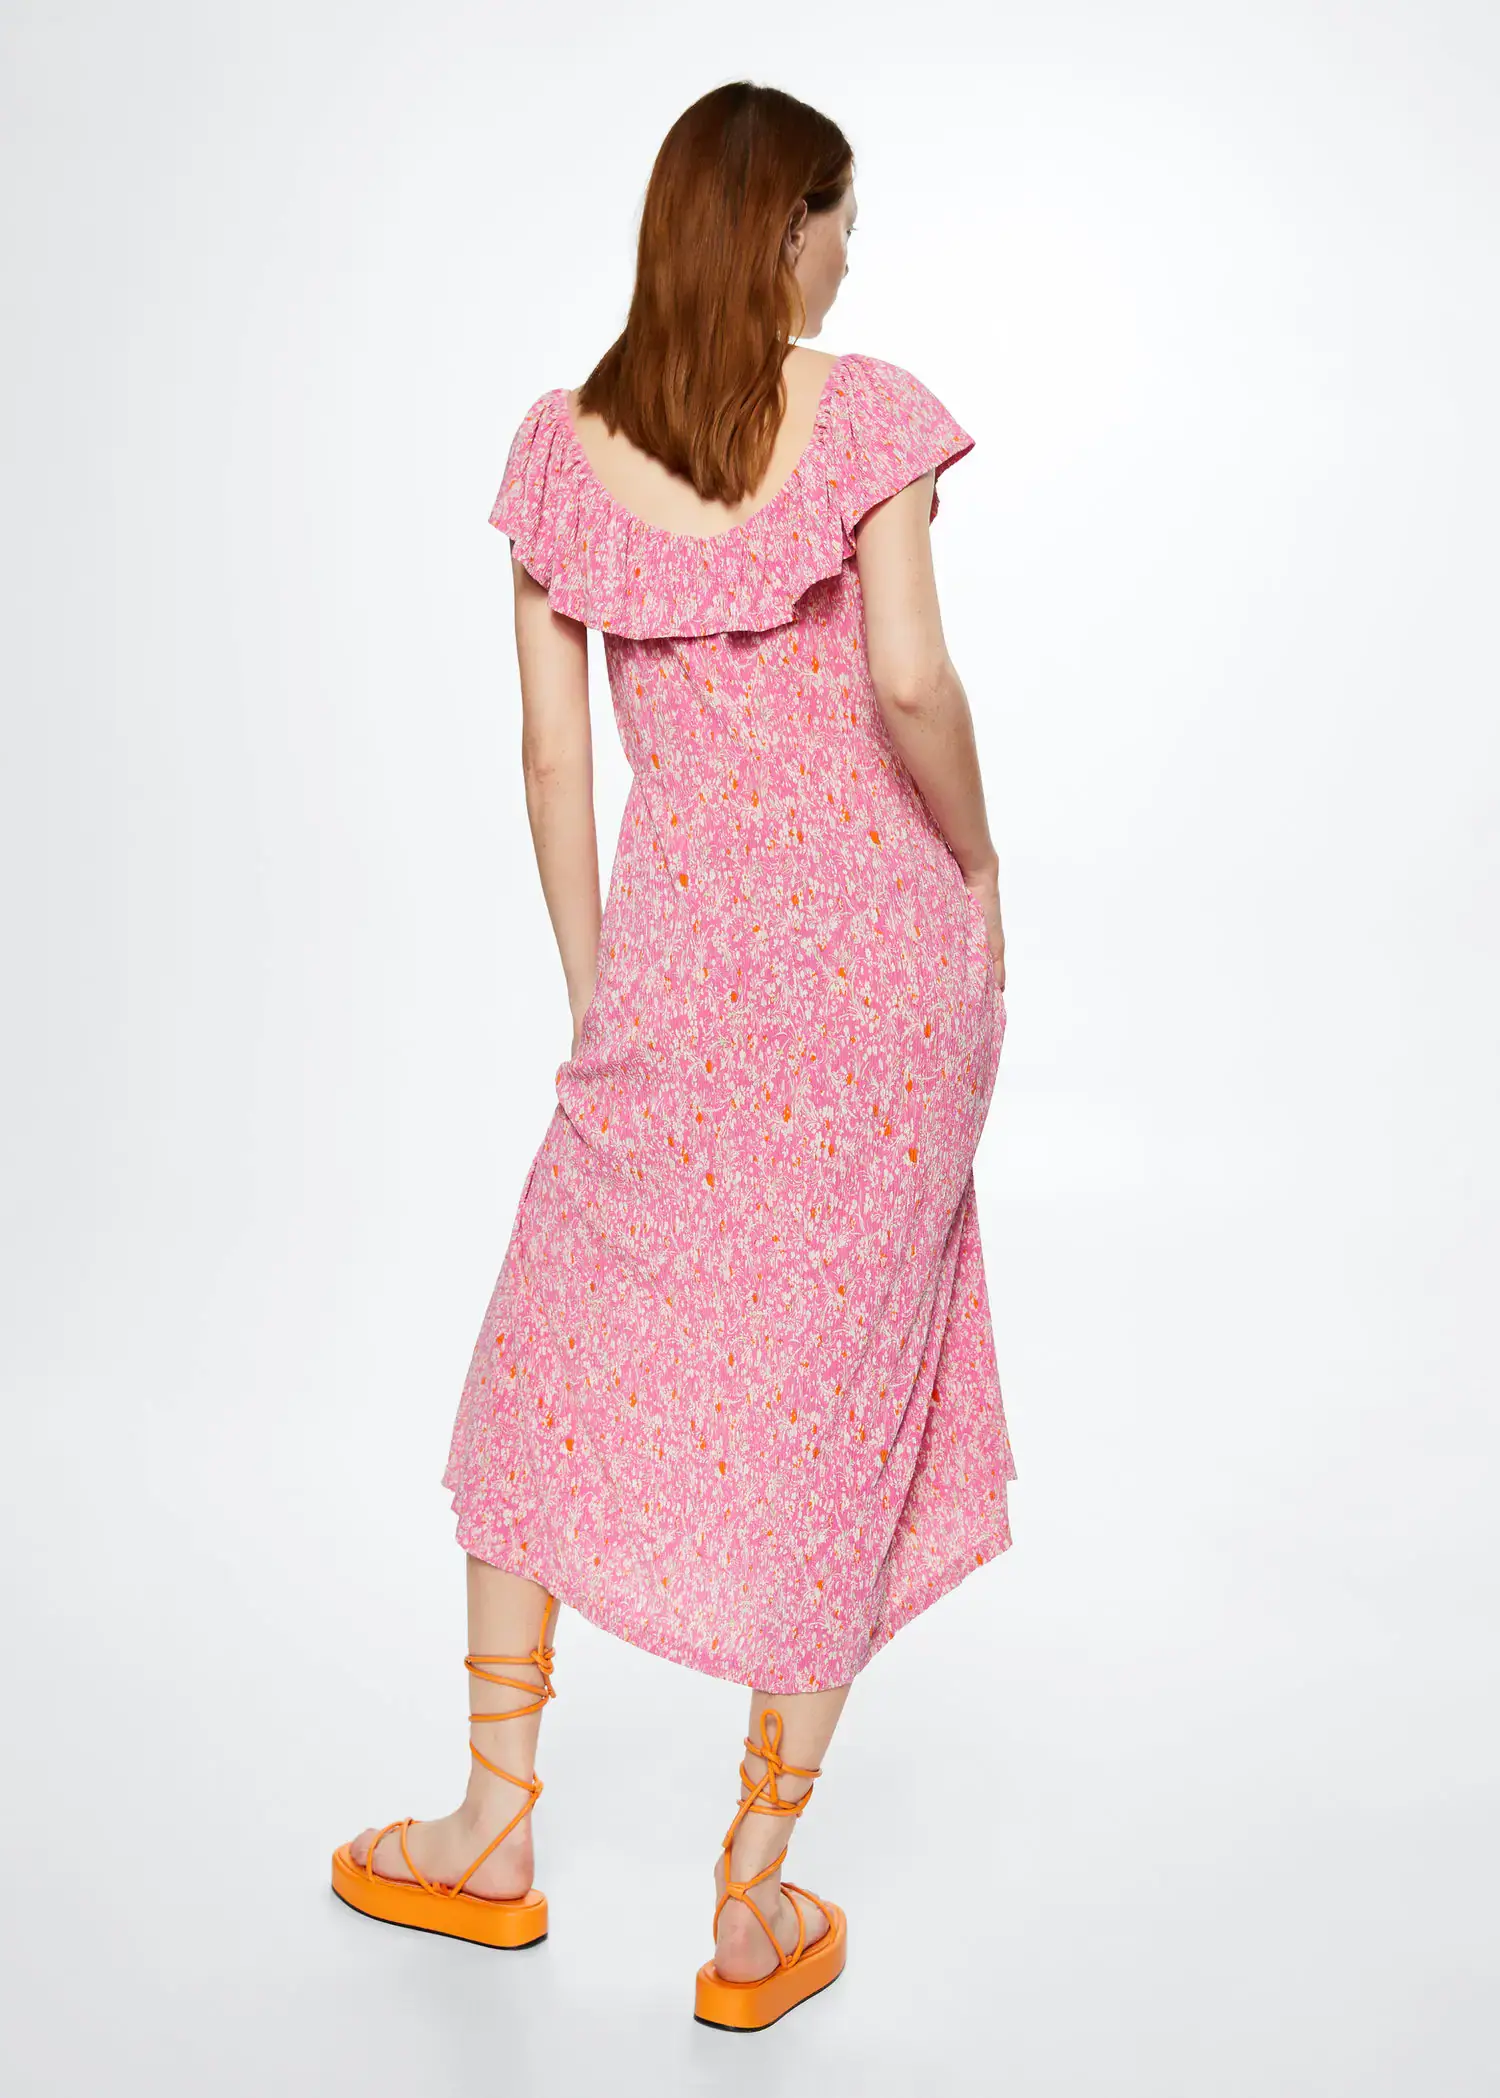 Mango Floral print dress. a woman in a pink dress standing in front of a white wall. 